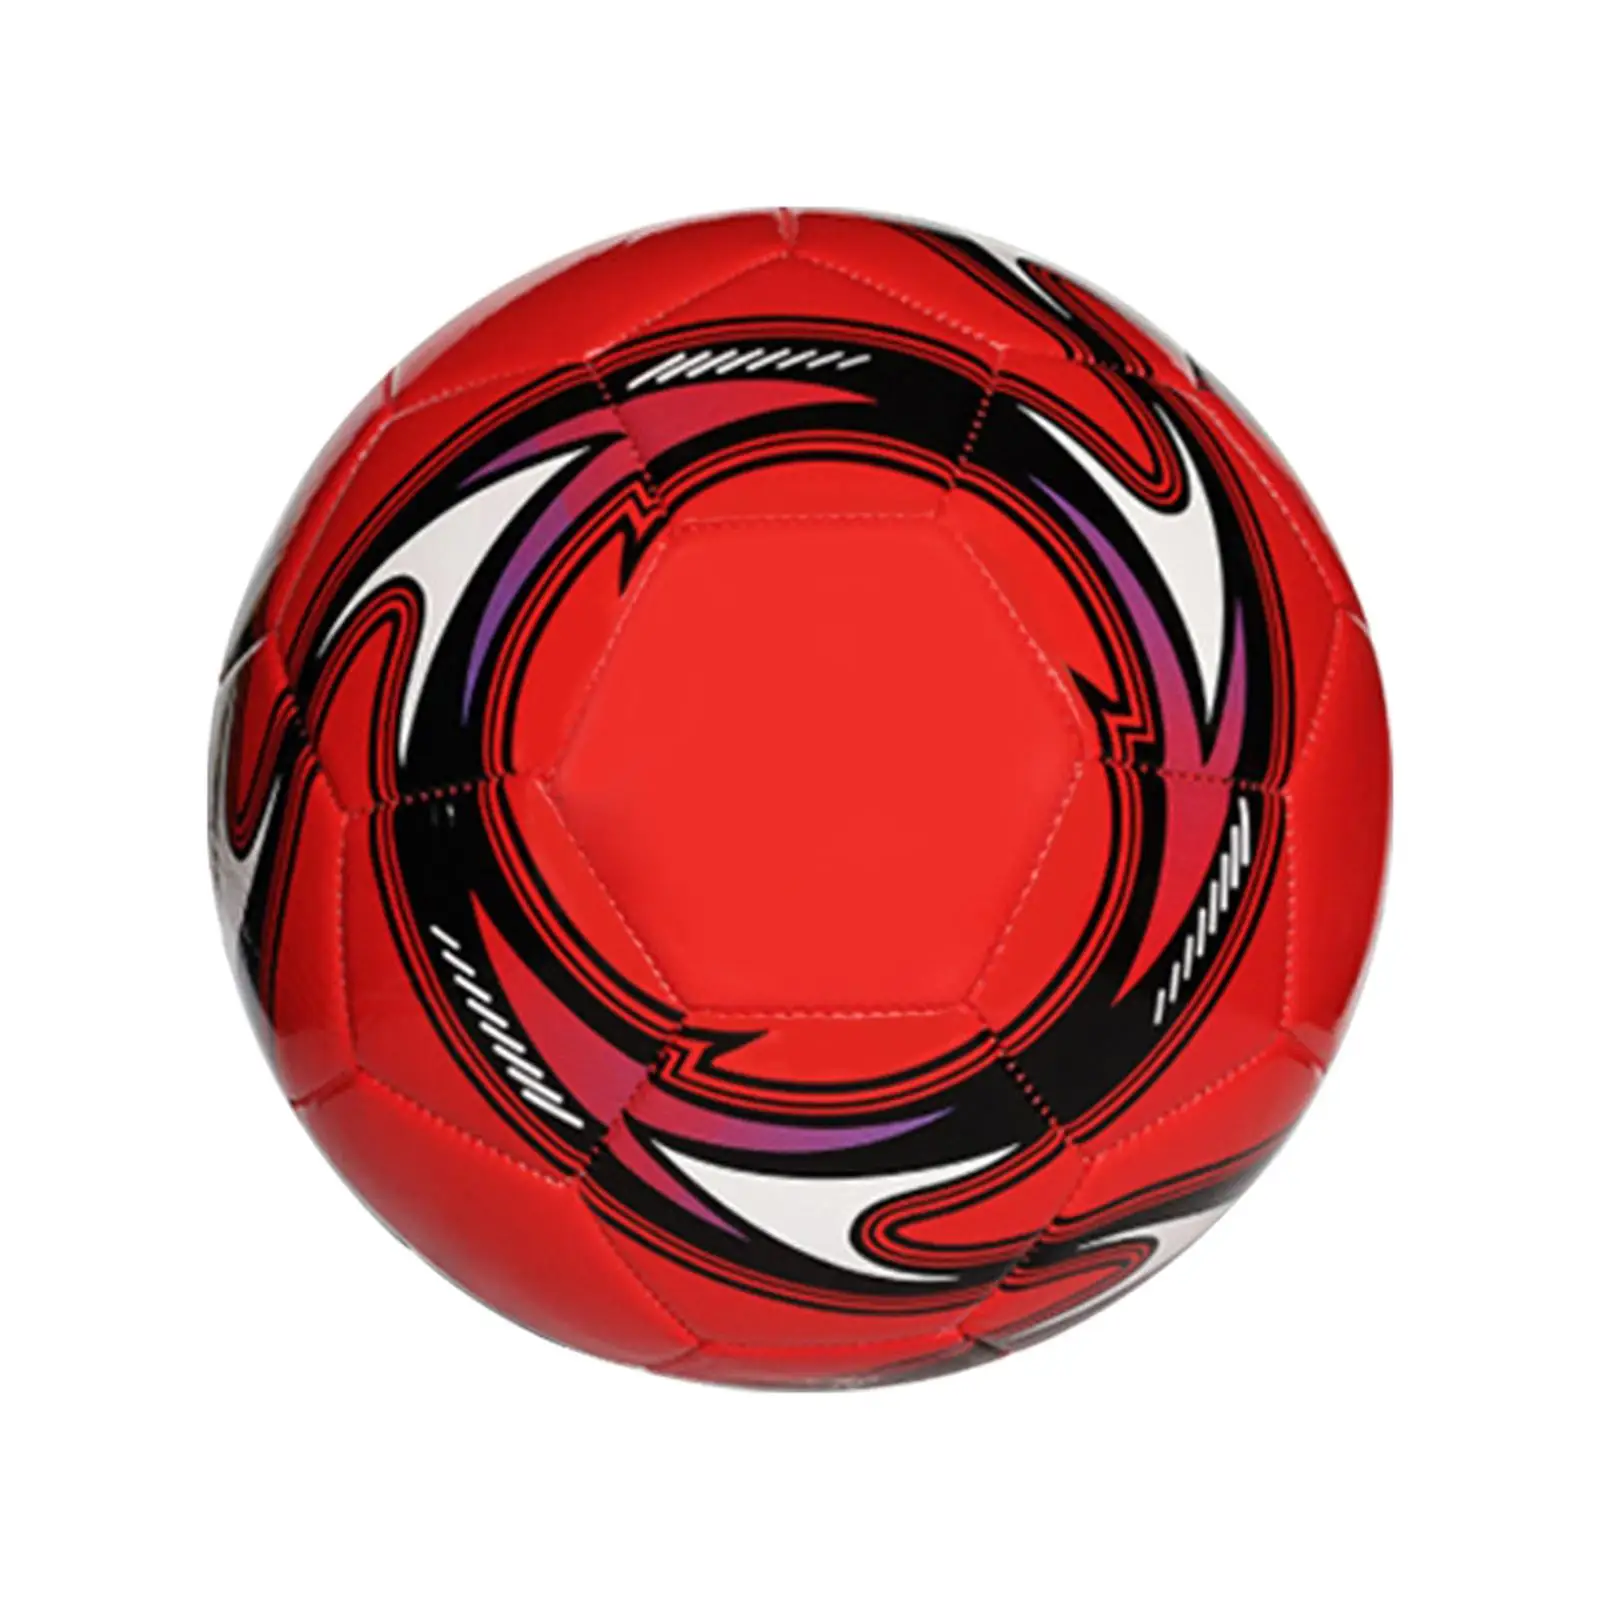 Soccer Ball Wear Resistant Football for Professionals Adults Beginners